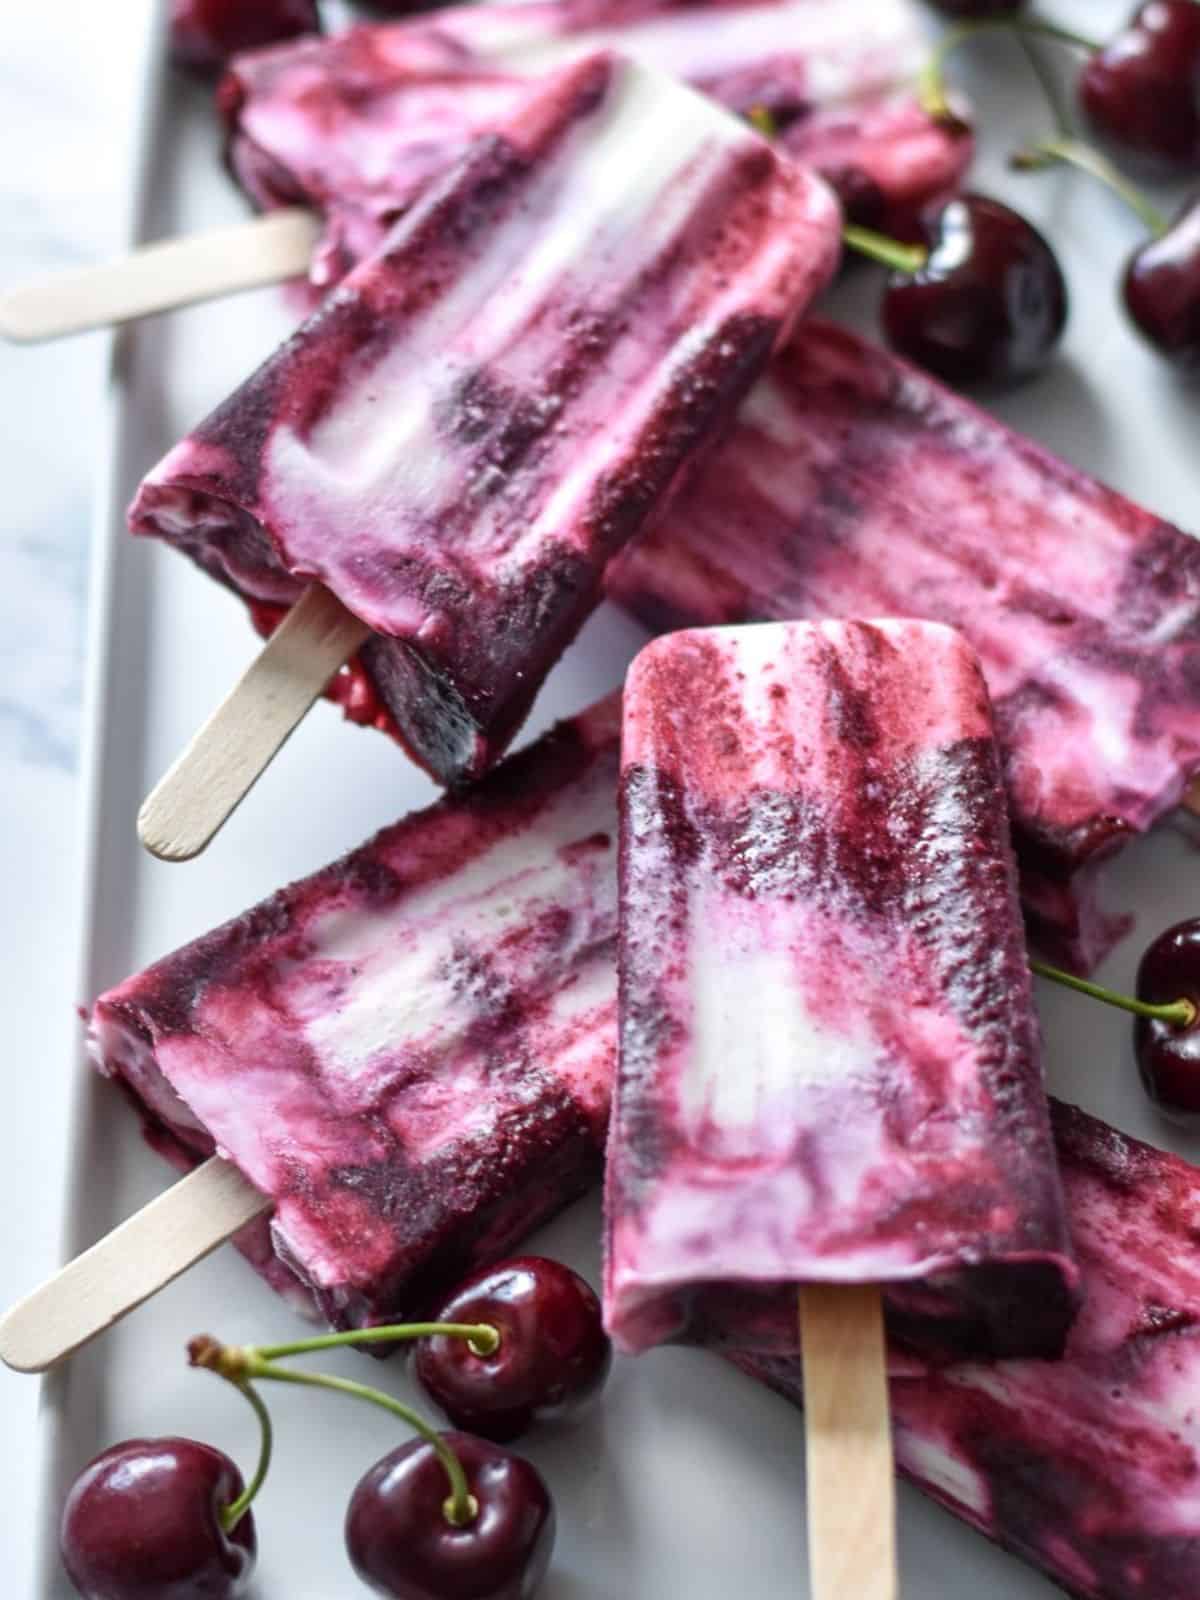 homemade cherry goat cheese paletas made with frozen cherries and goat cheese.